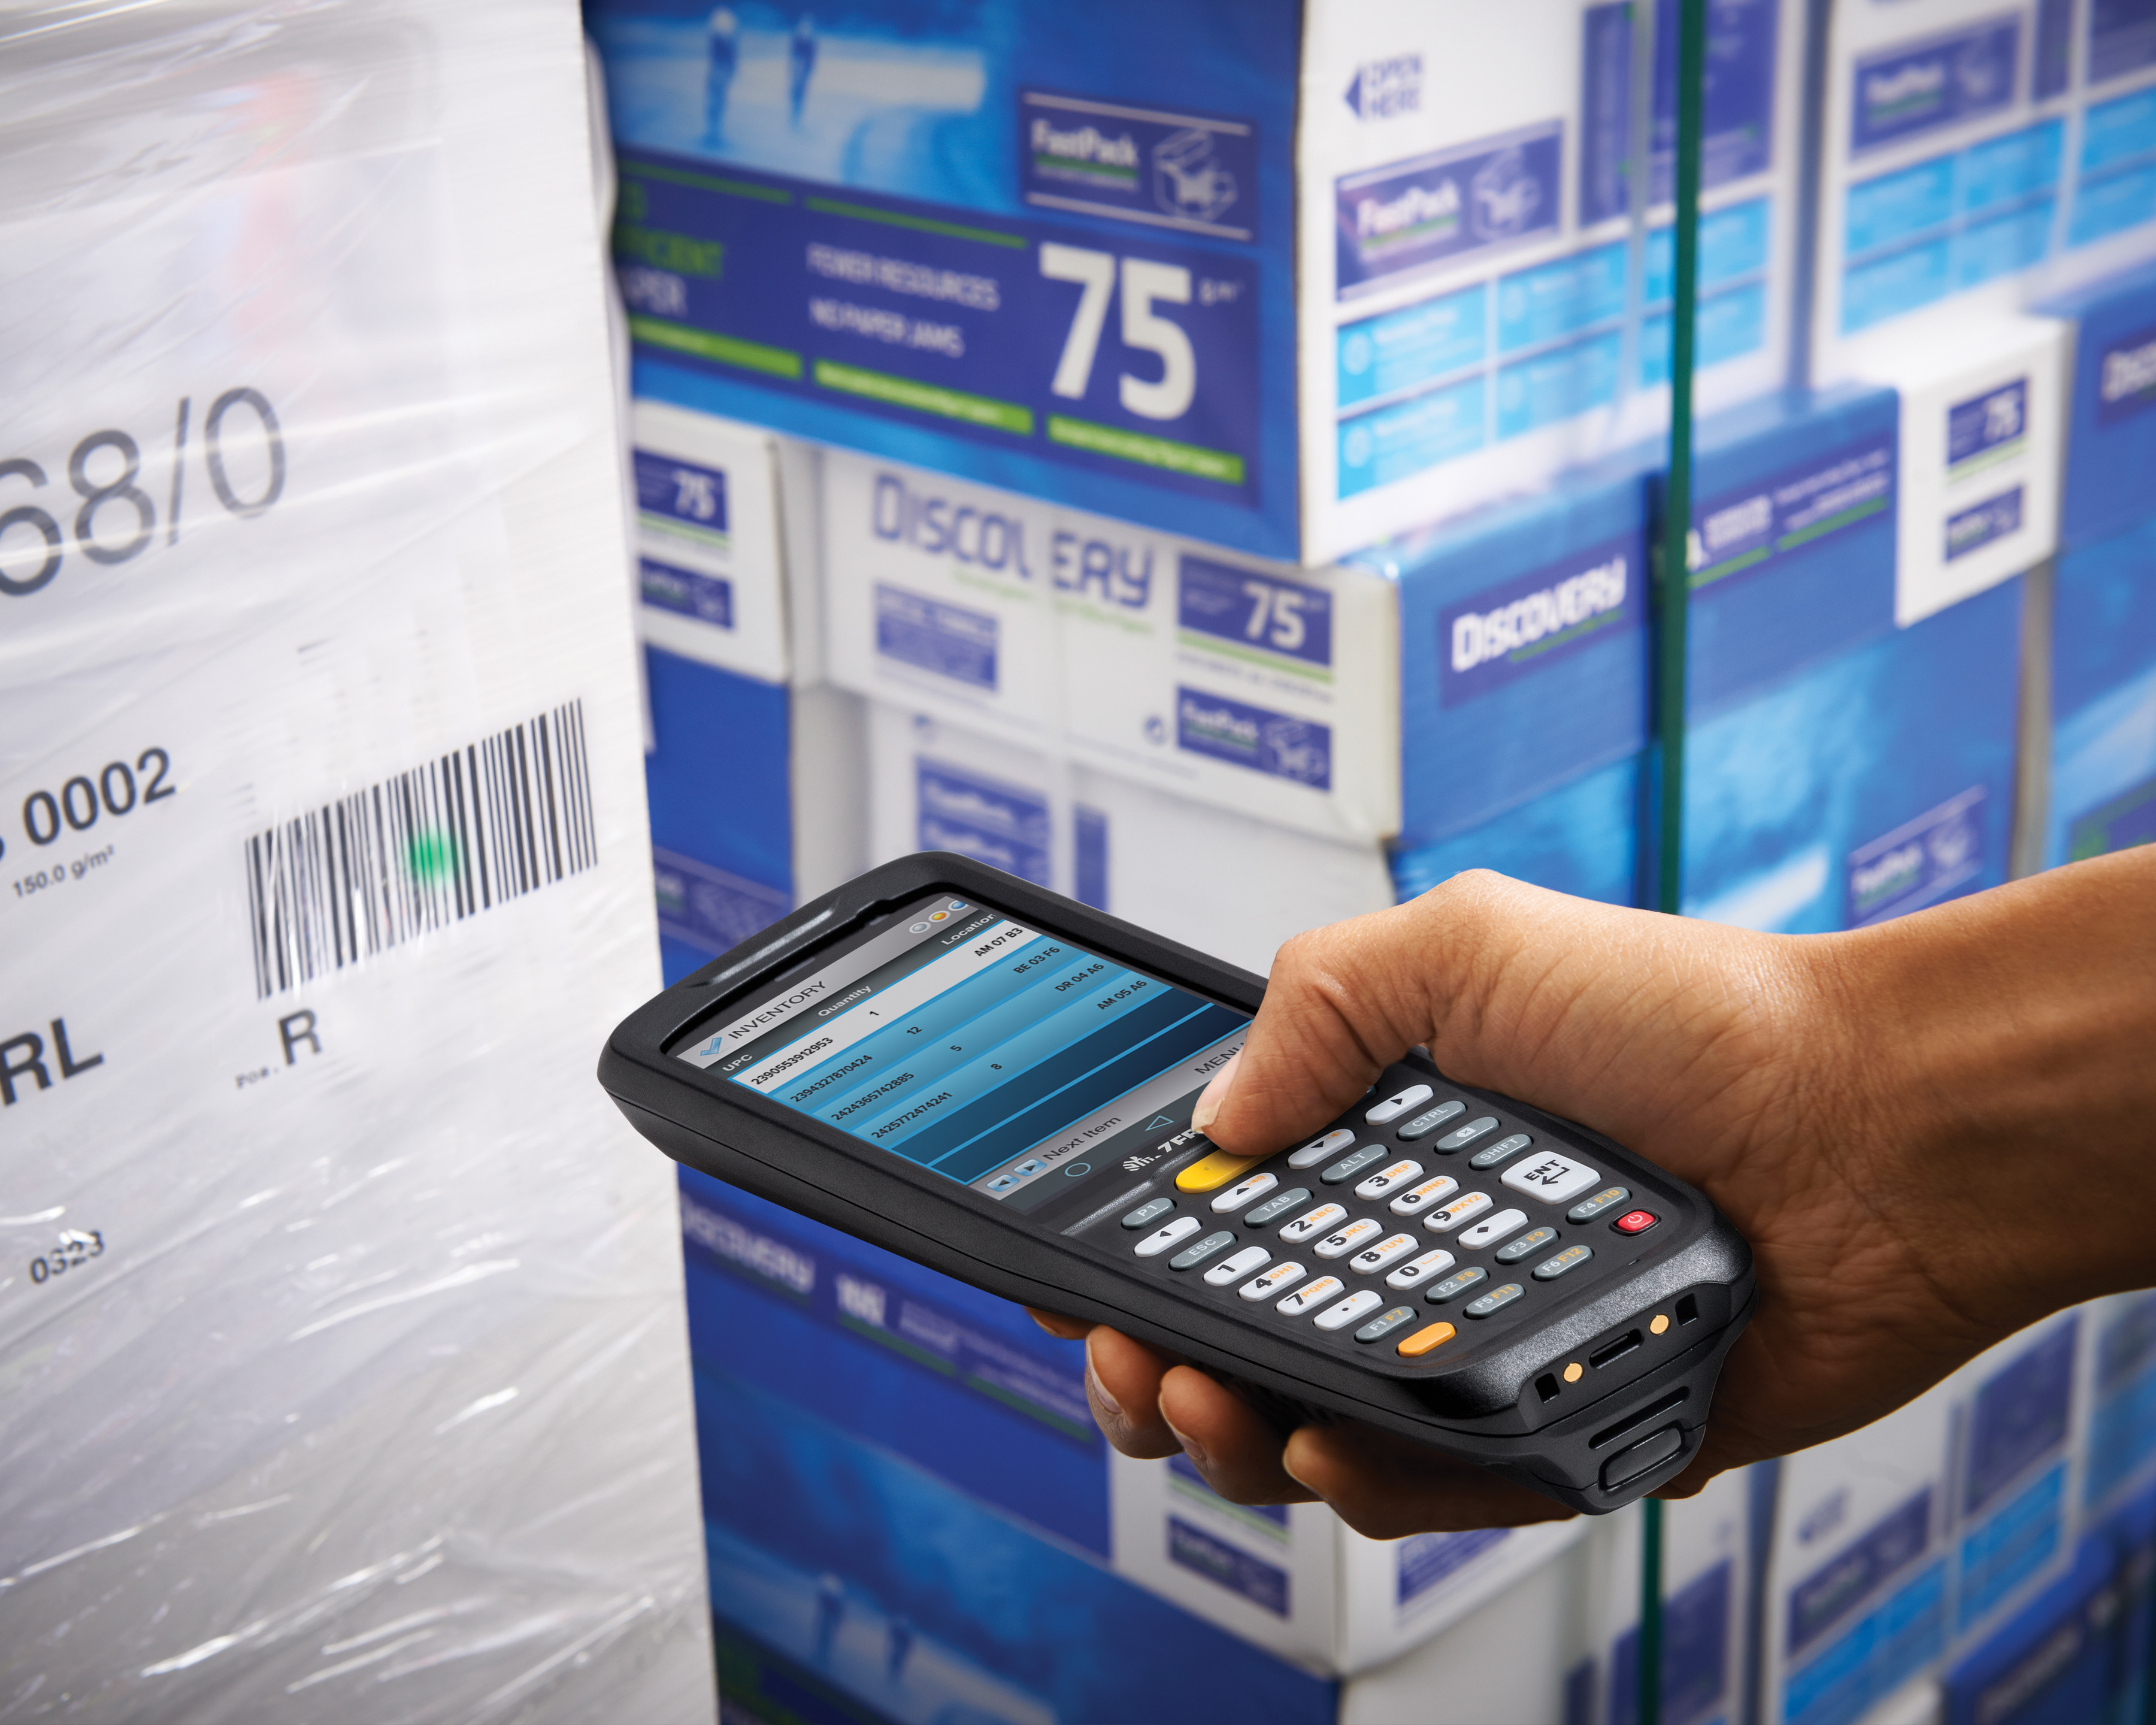 A person scanning a barcode with a Zebra MC9200 handheld computer